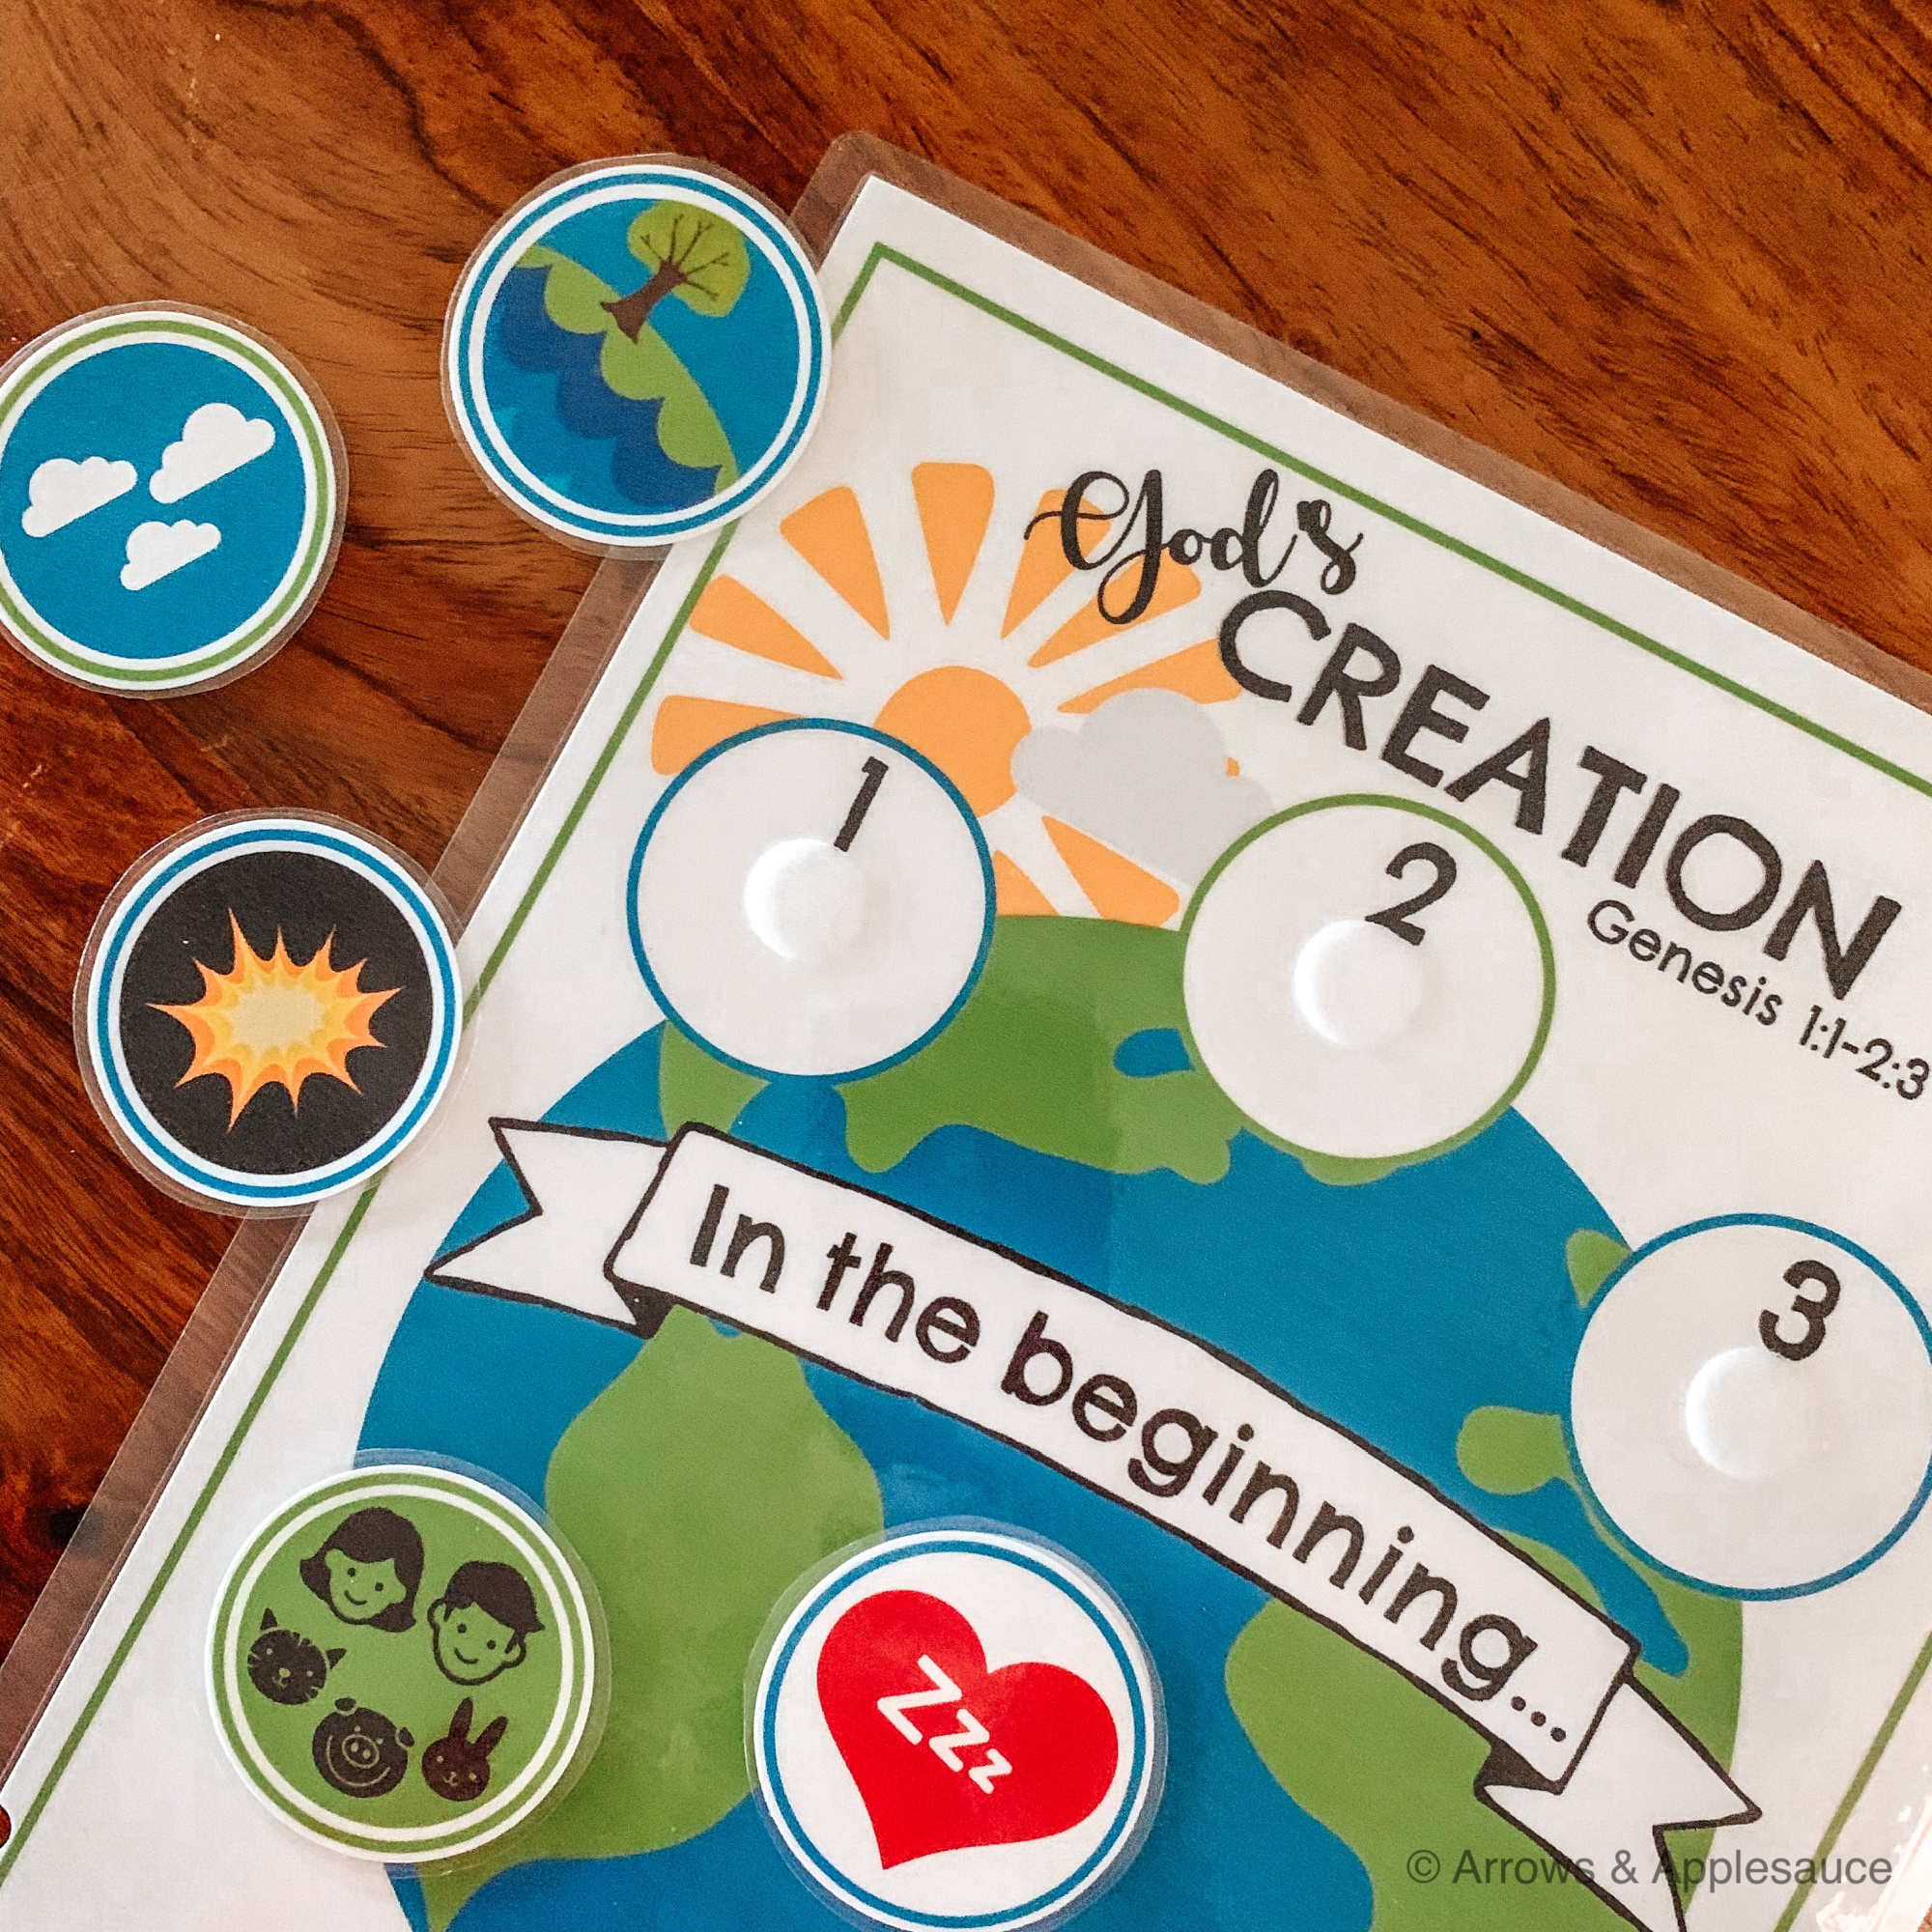 Days of Creation Pocket Cards – Learning with Play